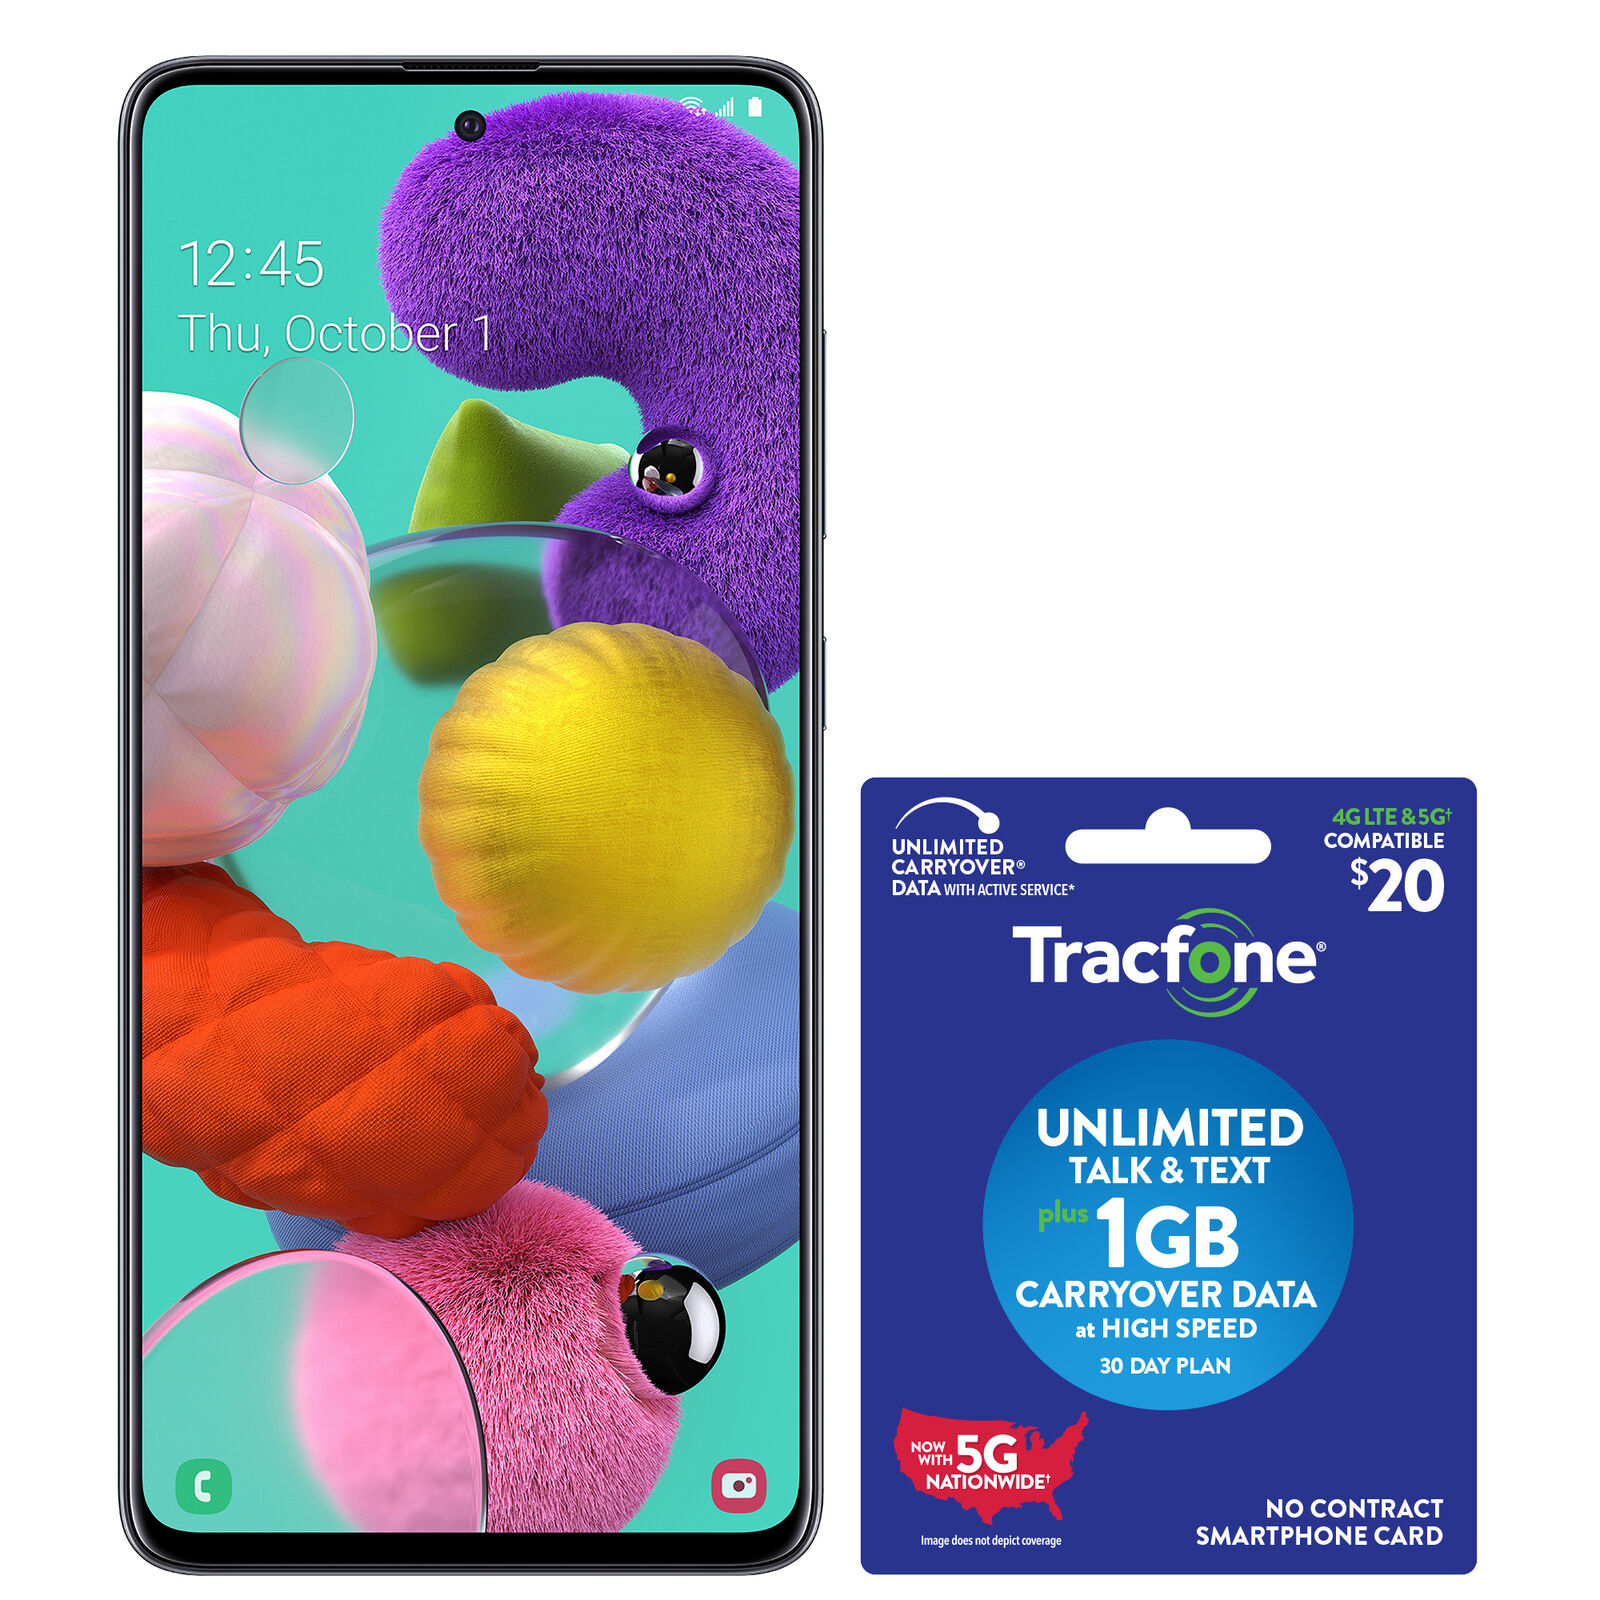 Tracfone Samsung Galaxy A51 + $20 Airtime Card - Excellent Refurbished